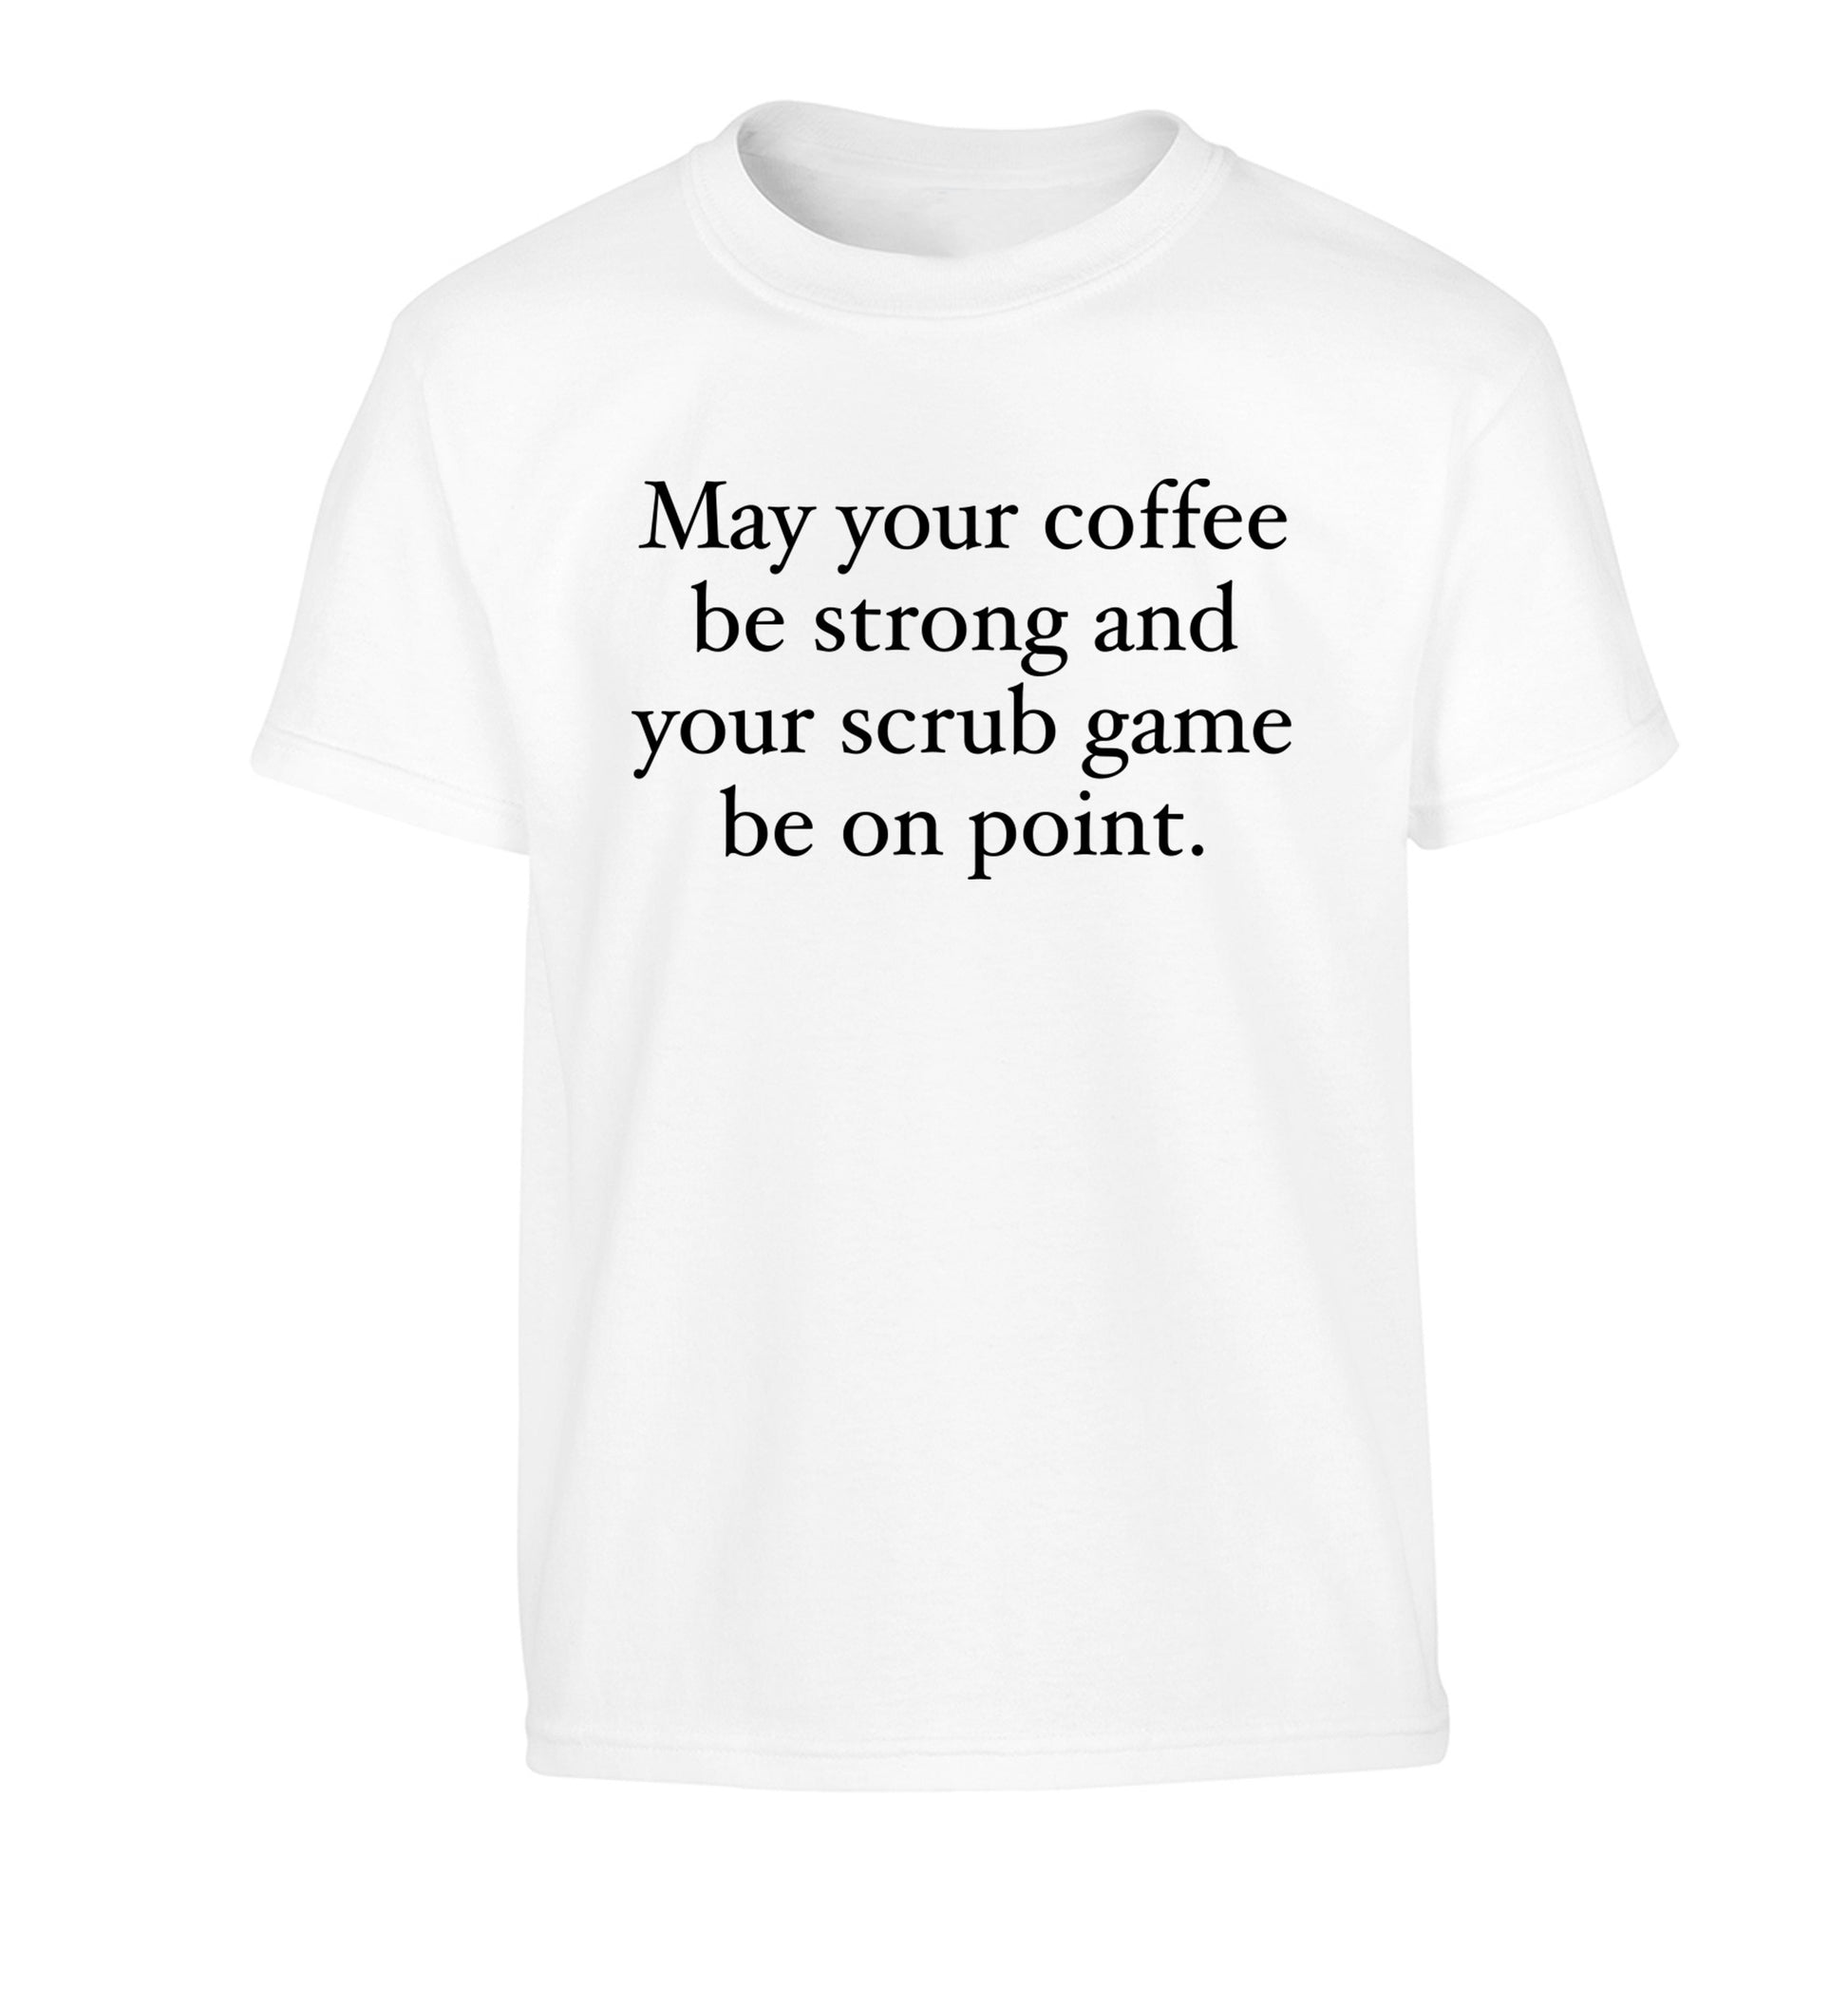 May your caffeine be strong and your scrub game be on point Children's white Tshirt 12-14 Years